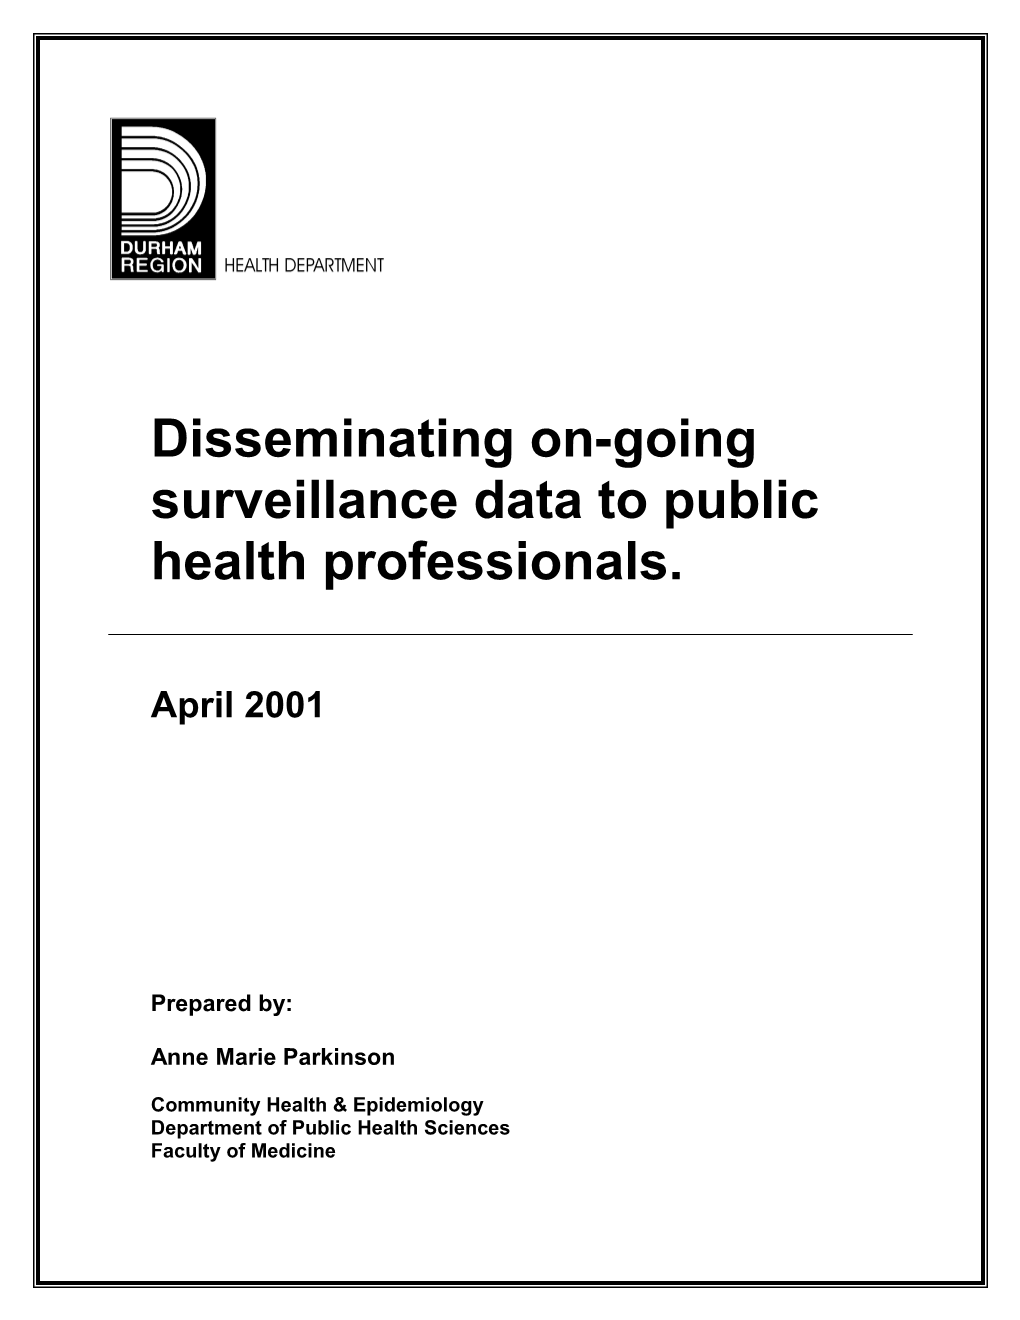 A Method for Disseminating On-Going Surveillance Data to Public Health Professionals